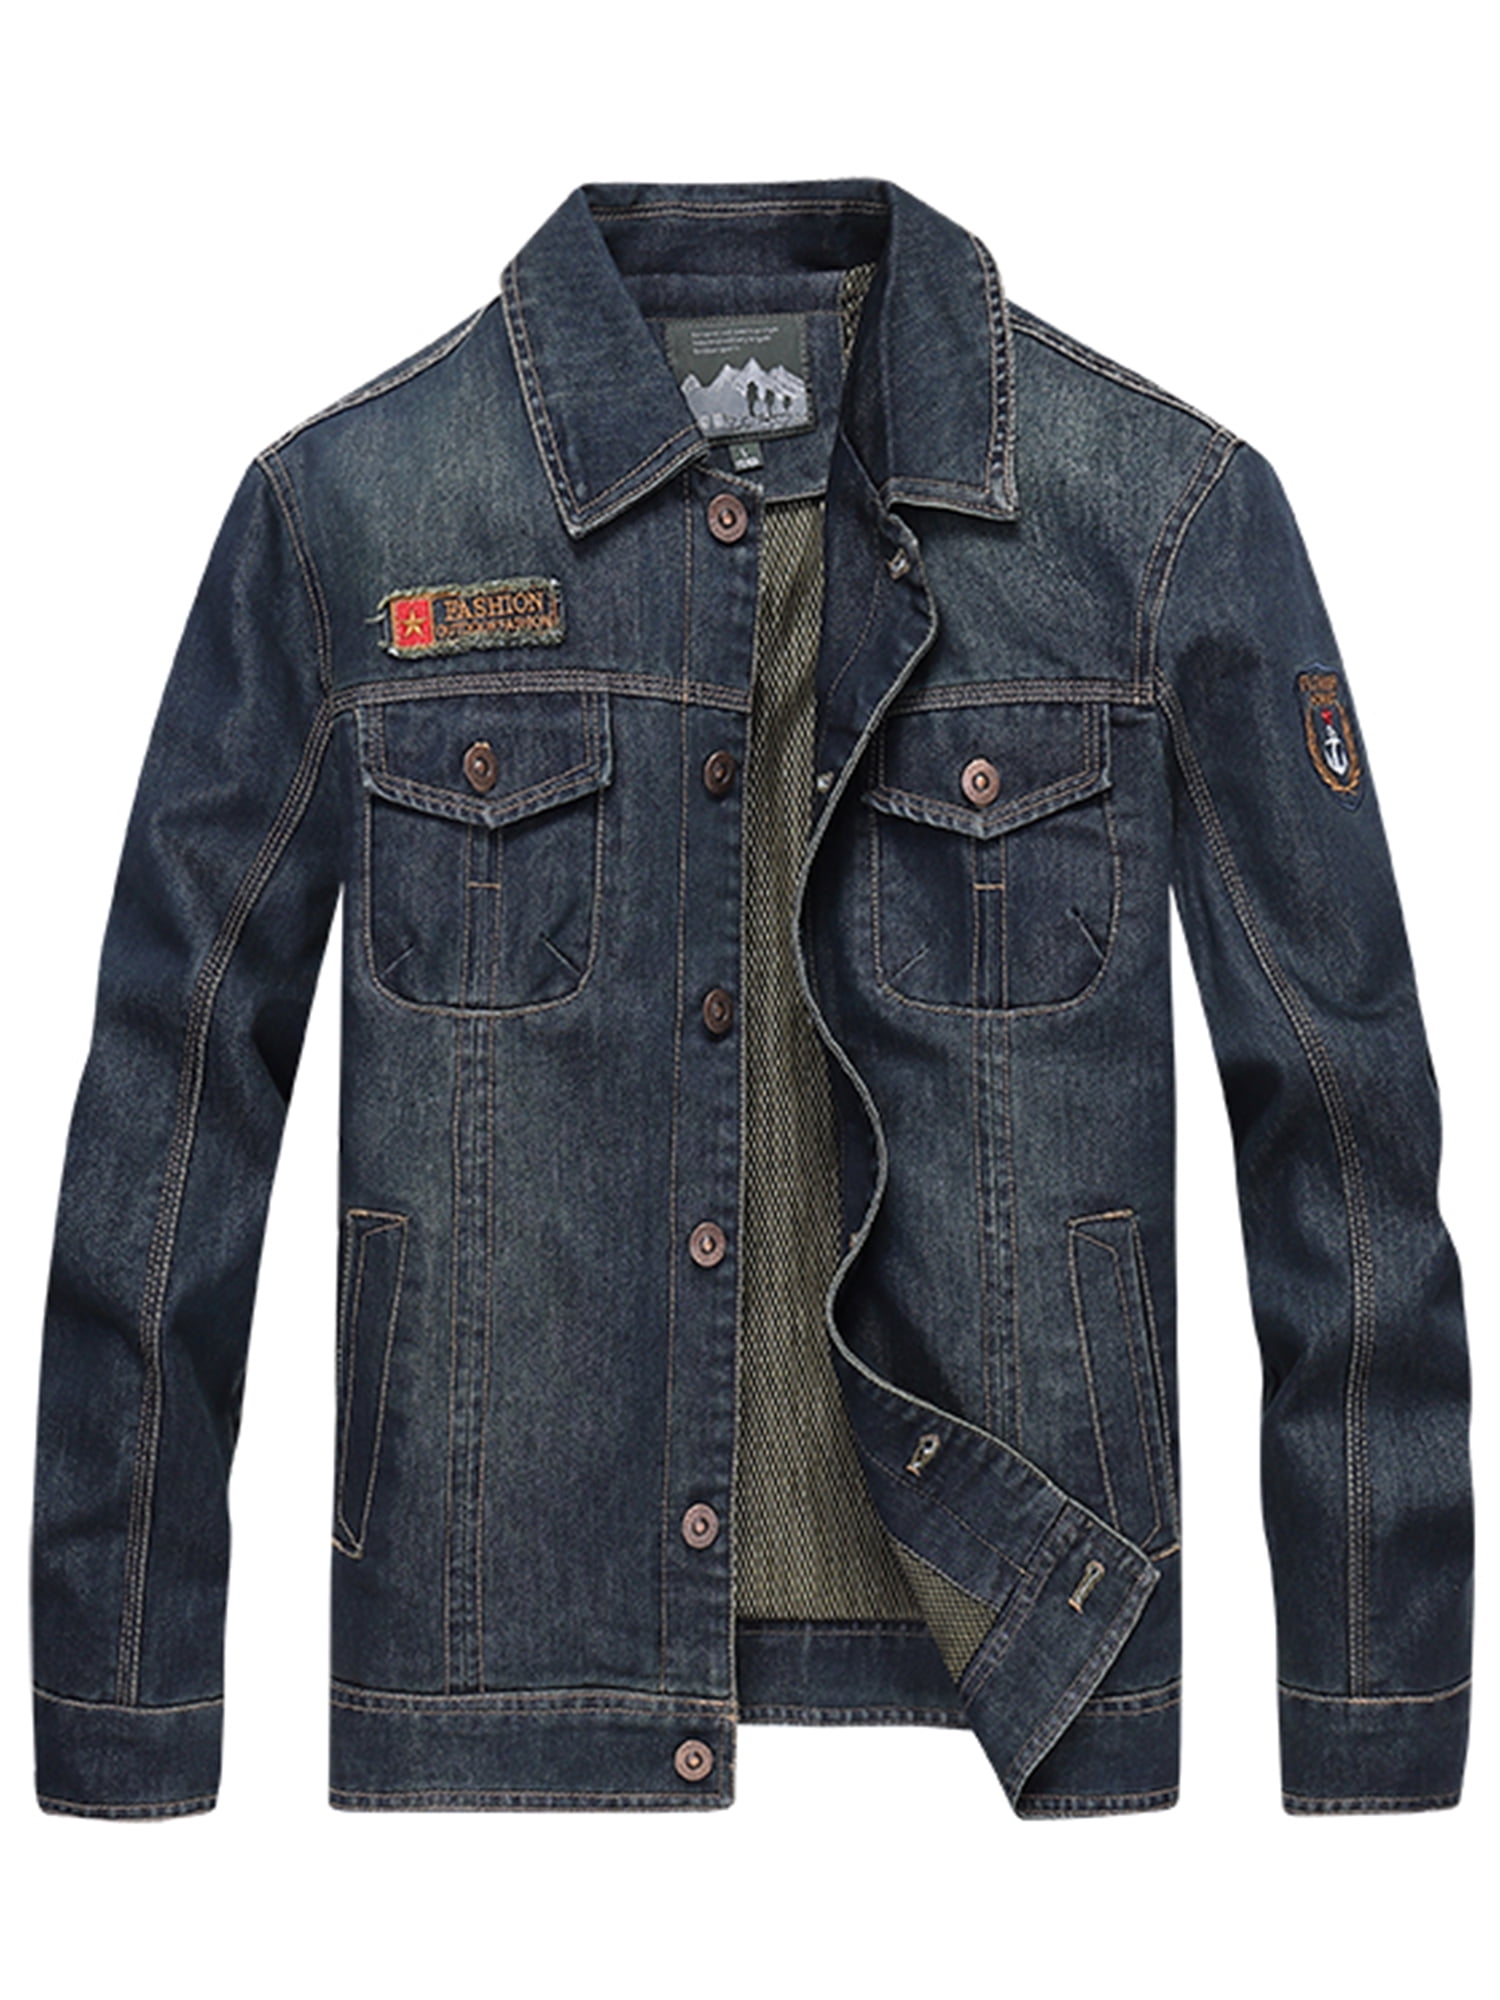 DOWNJAKE - Men' Denim Jacket Sherpa Lined Button Front Outdoor Classic